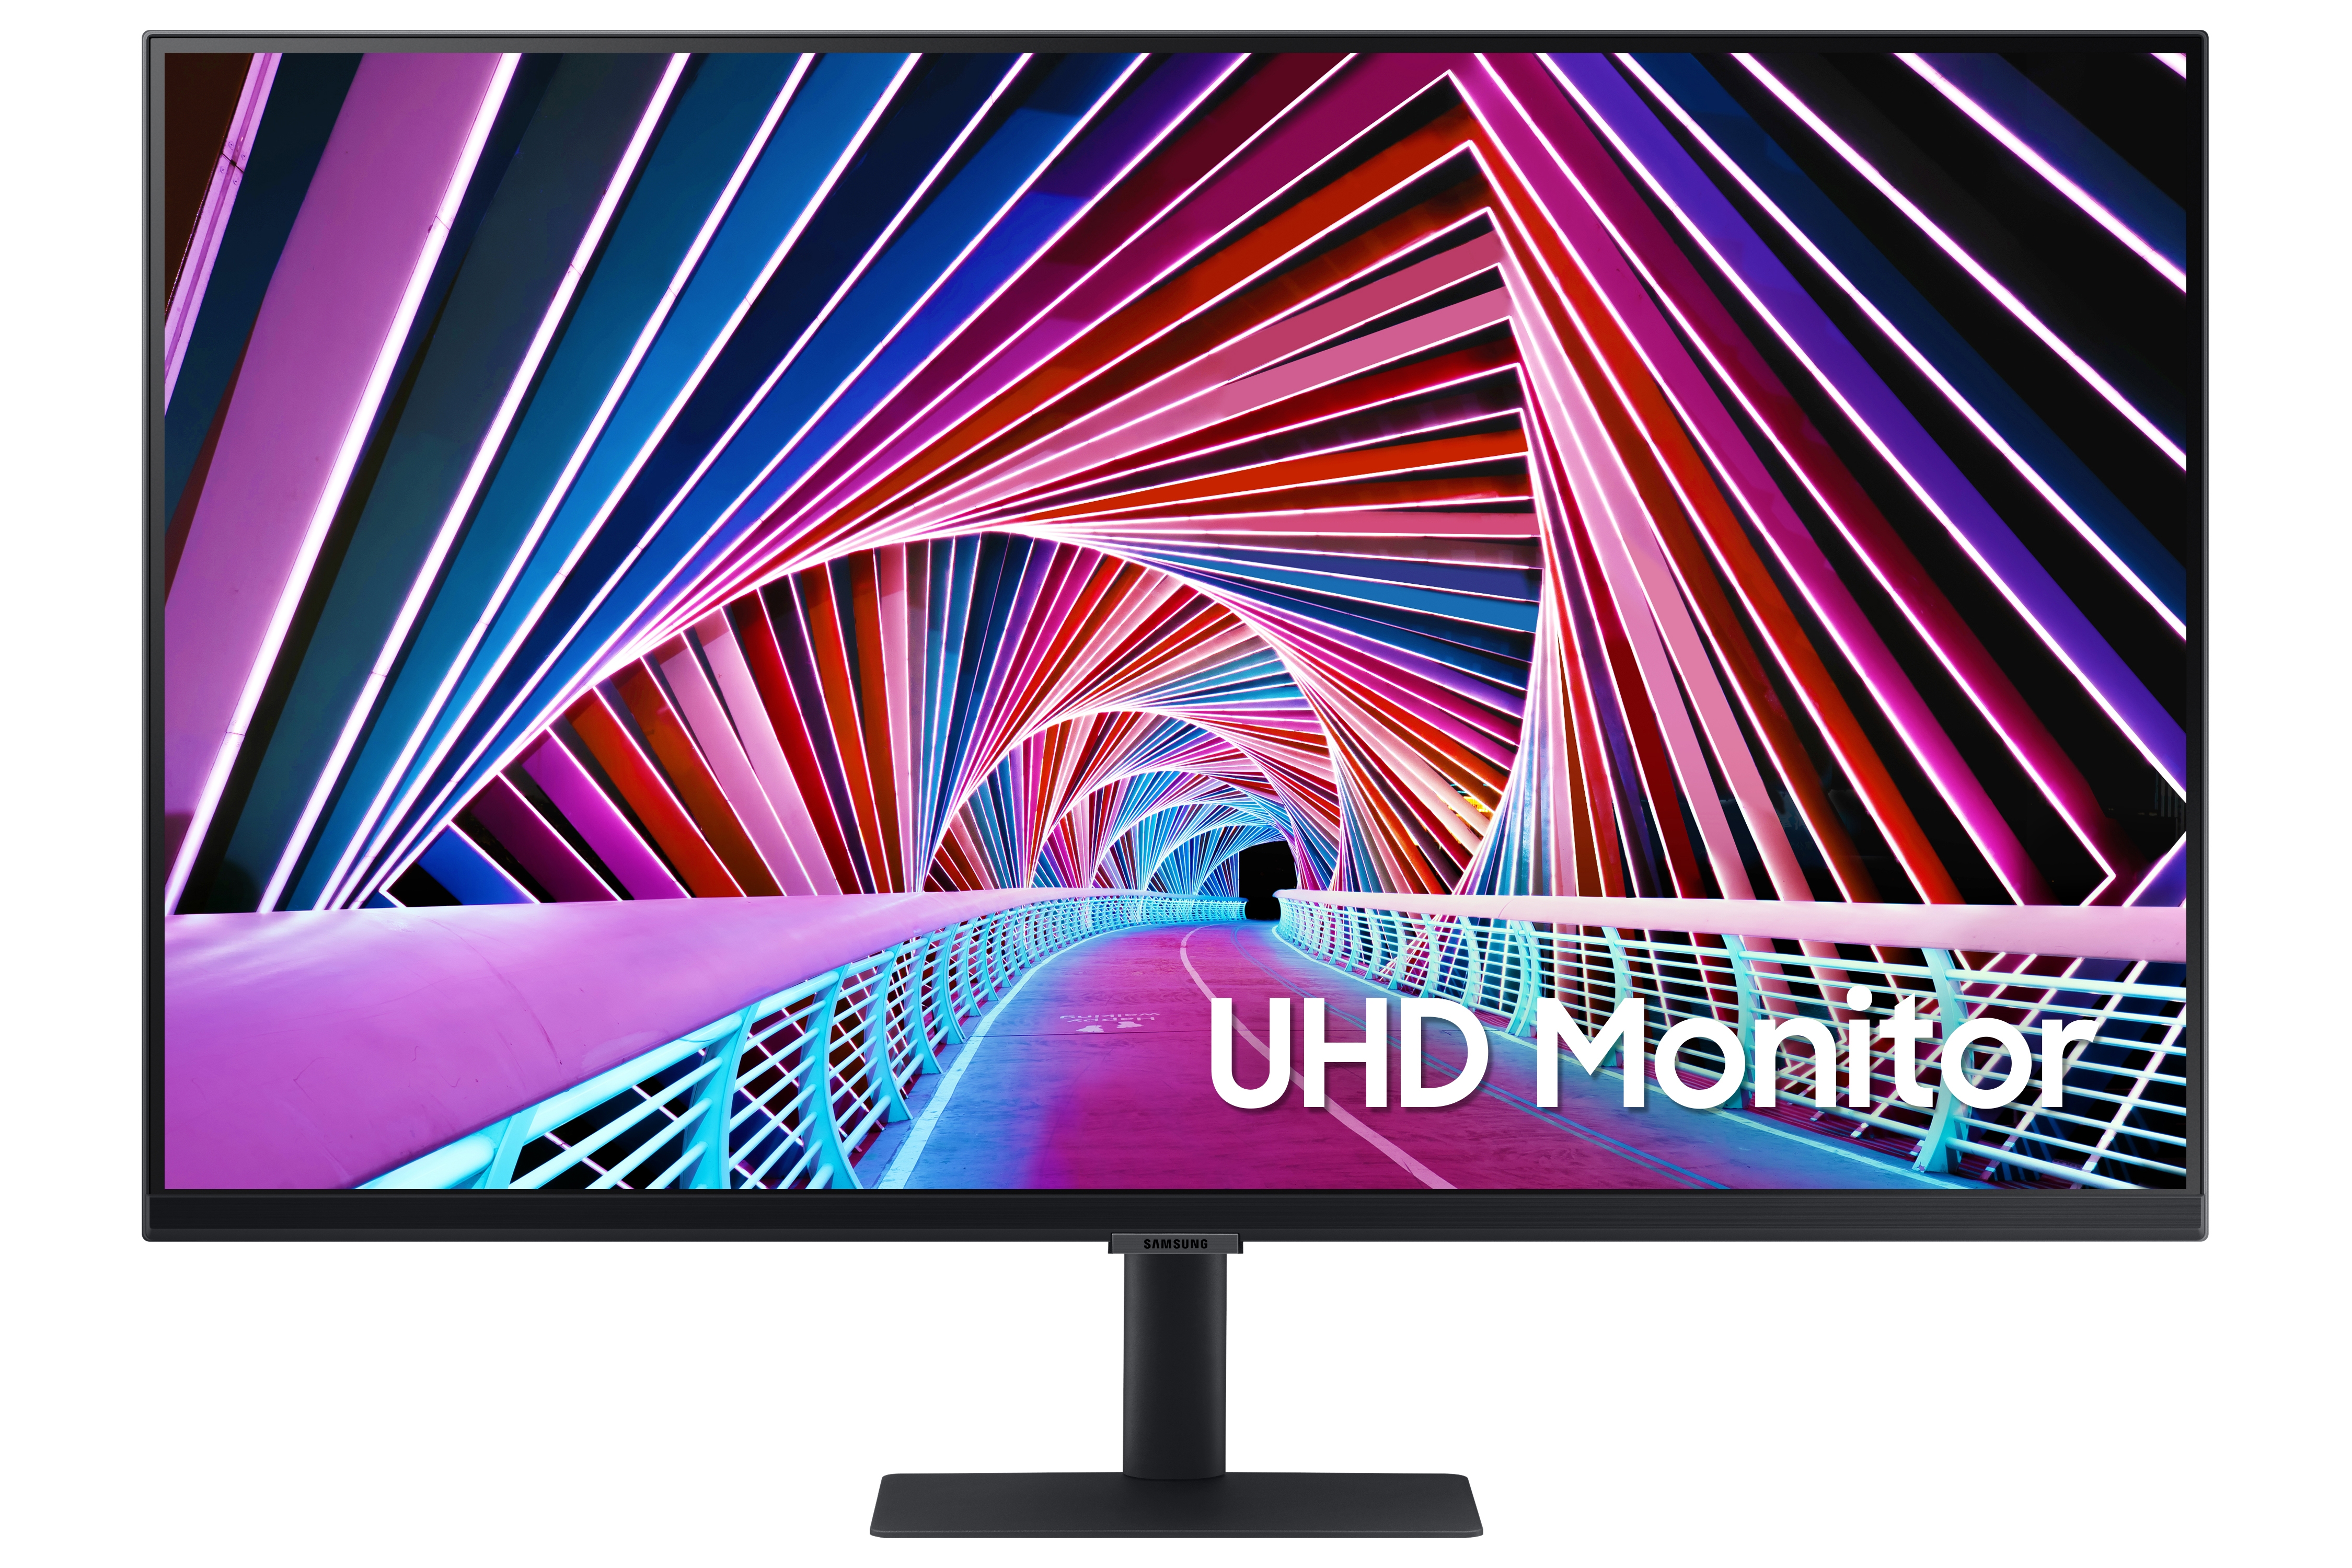 HDMI Monitor HDR10 USB Port Computer Monitor 1 Billion Colors TUV-Certified Intelligent Eye Care SAMSUNG 32 Inch 4K UHD Monitor LS32A804NMNXGO Vertical Monitor S80A 